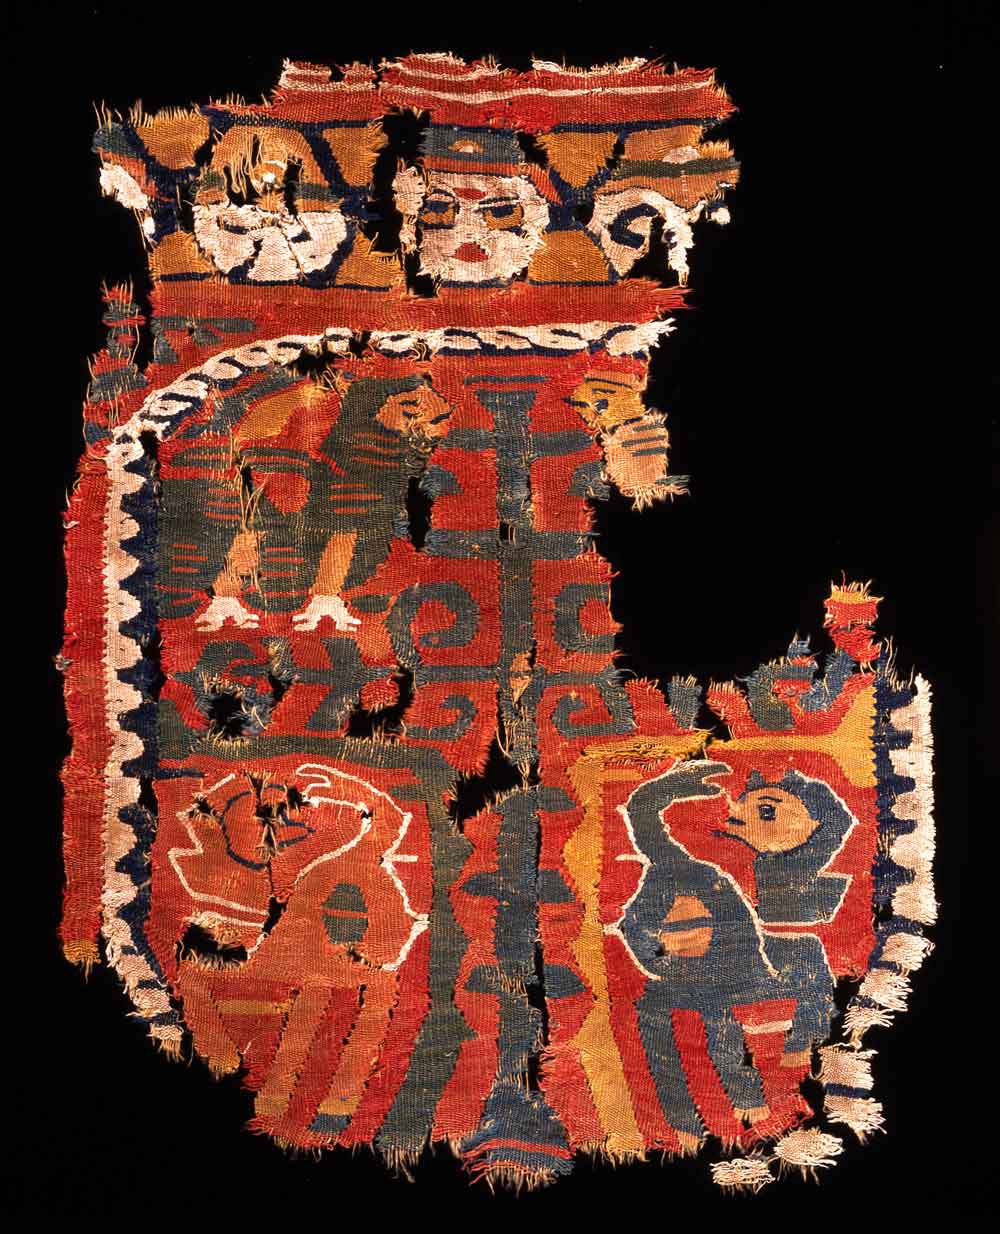 Textile with animals around a stylized tree, Egypt; 9th-10th century Islamic artists adopted motifs from Antiquity that had previously had a more or less pronounced symbolic significance that was lost in the new cultural context. Examples are sphinxes, harpies, griffins, sun symbols, and the Tree of Life. This last motif, the Tree of Life, is an ancient symbol dating back several millennia before the Christian era, and whose significance is quite vague. It is the tree of the gods that links heaven and earth. It is often flanked by two or more animals or mythical creatures and became a well-established motif in textiles with medallion patterns. There is no evidence that the motif has any specific significance in Islamic art, where it should be viewed as a decorative relic.